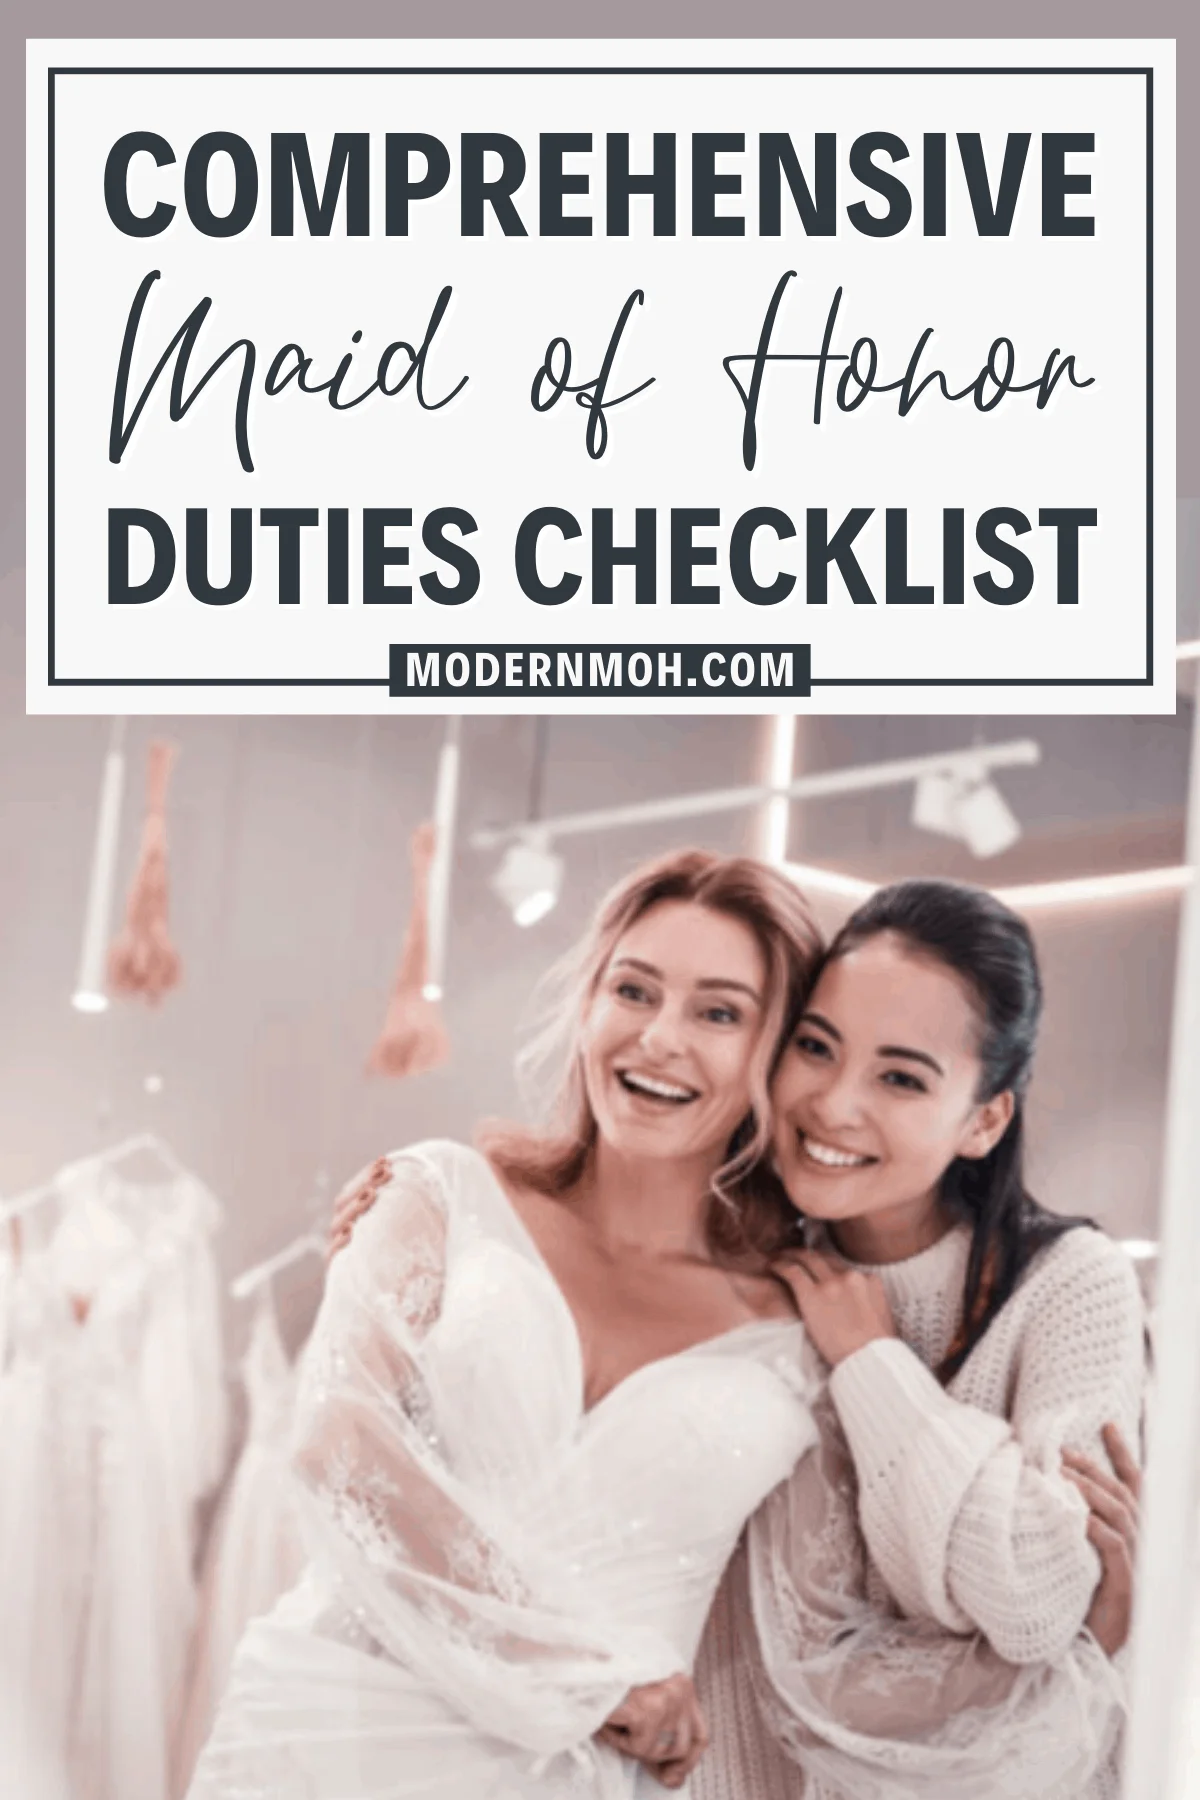 Maid of Honor Duties: A Checklist of Roles and Responsibilities